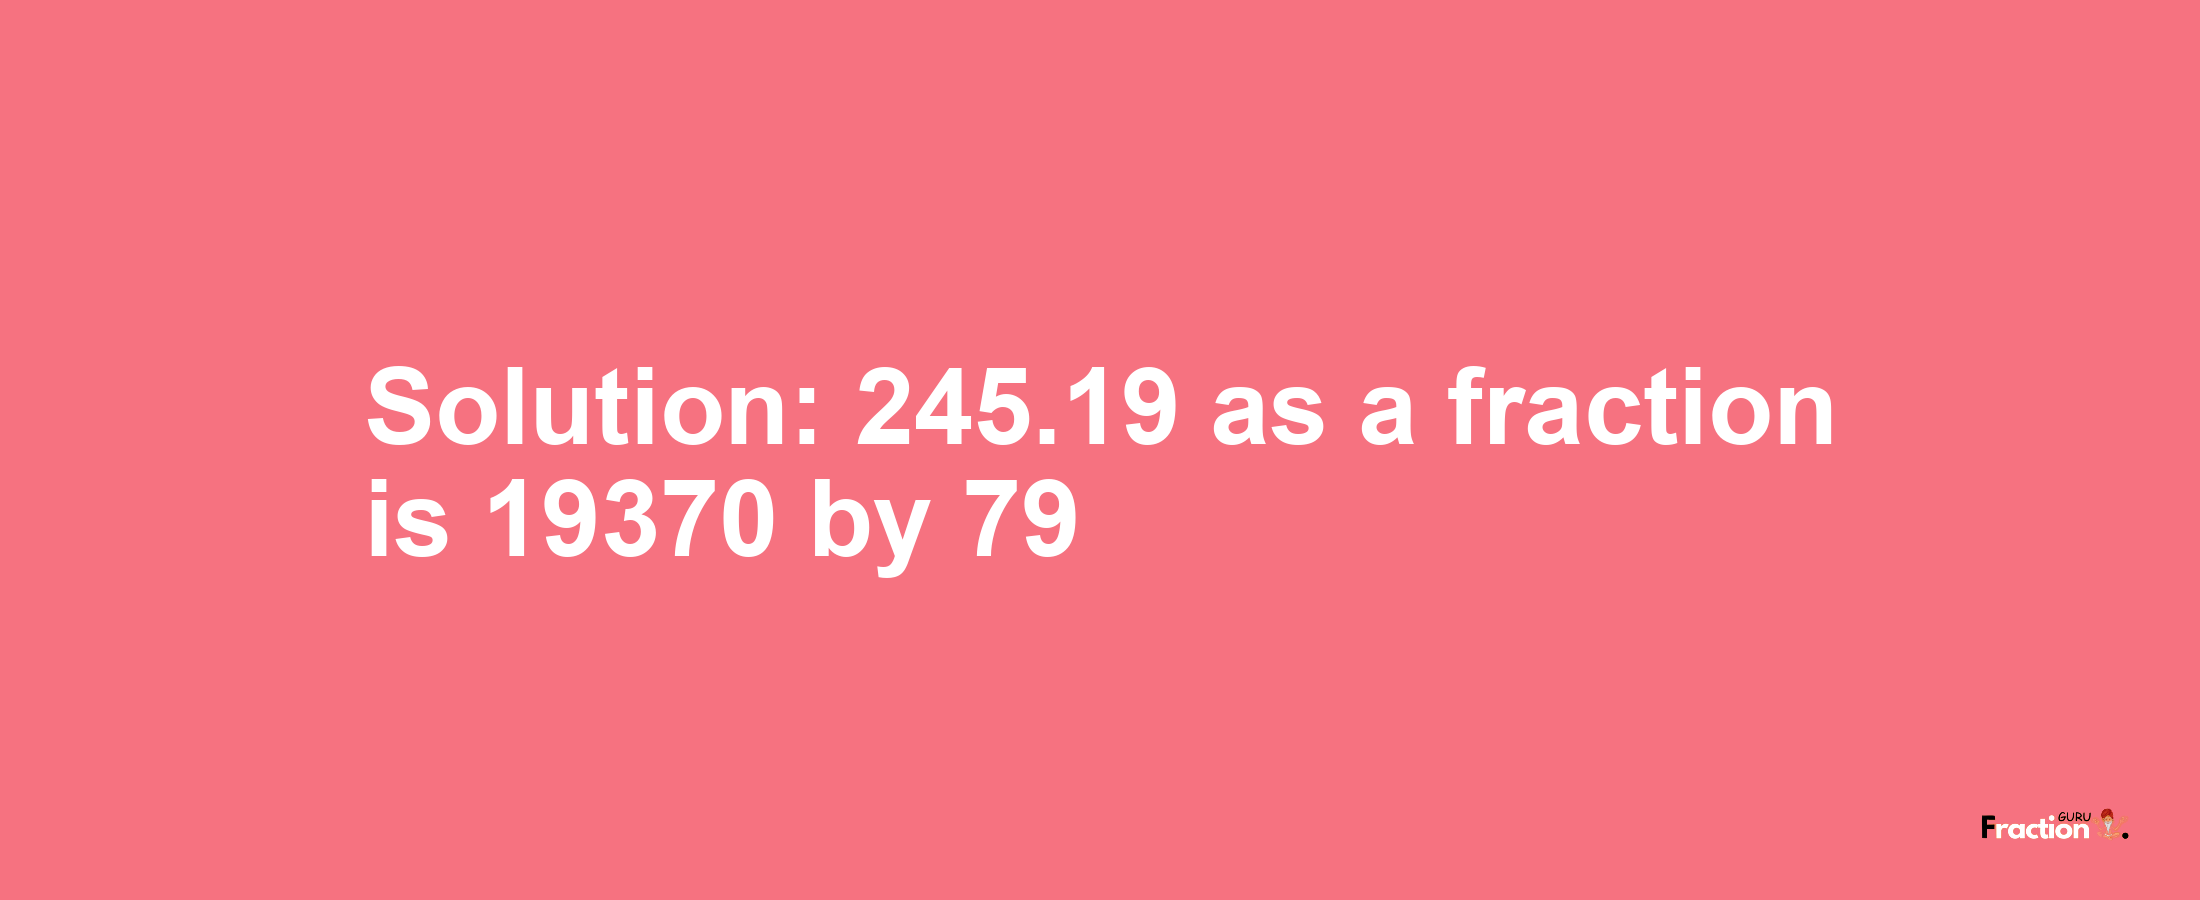 Solution:245.19 as a fraction is 19370/79